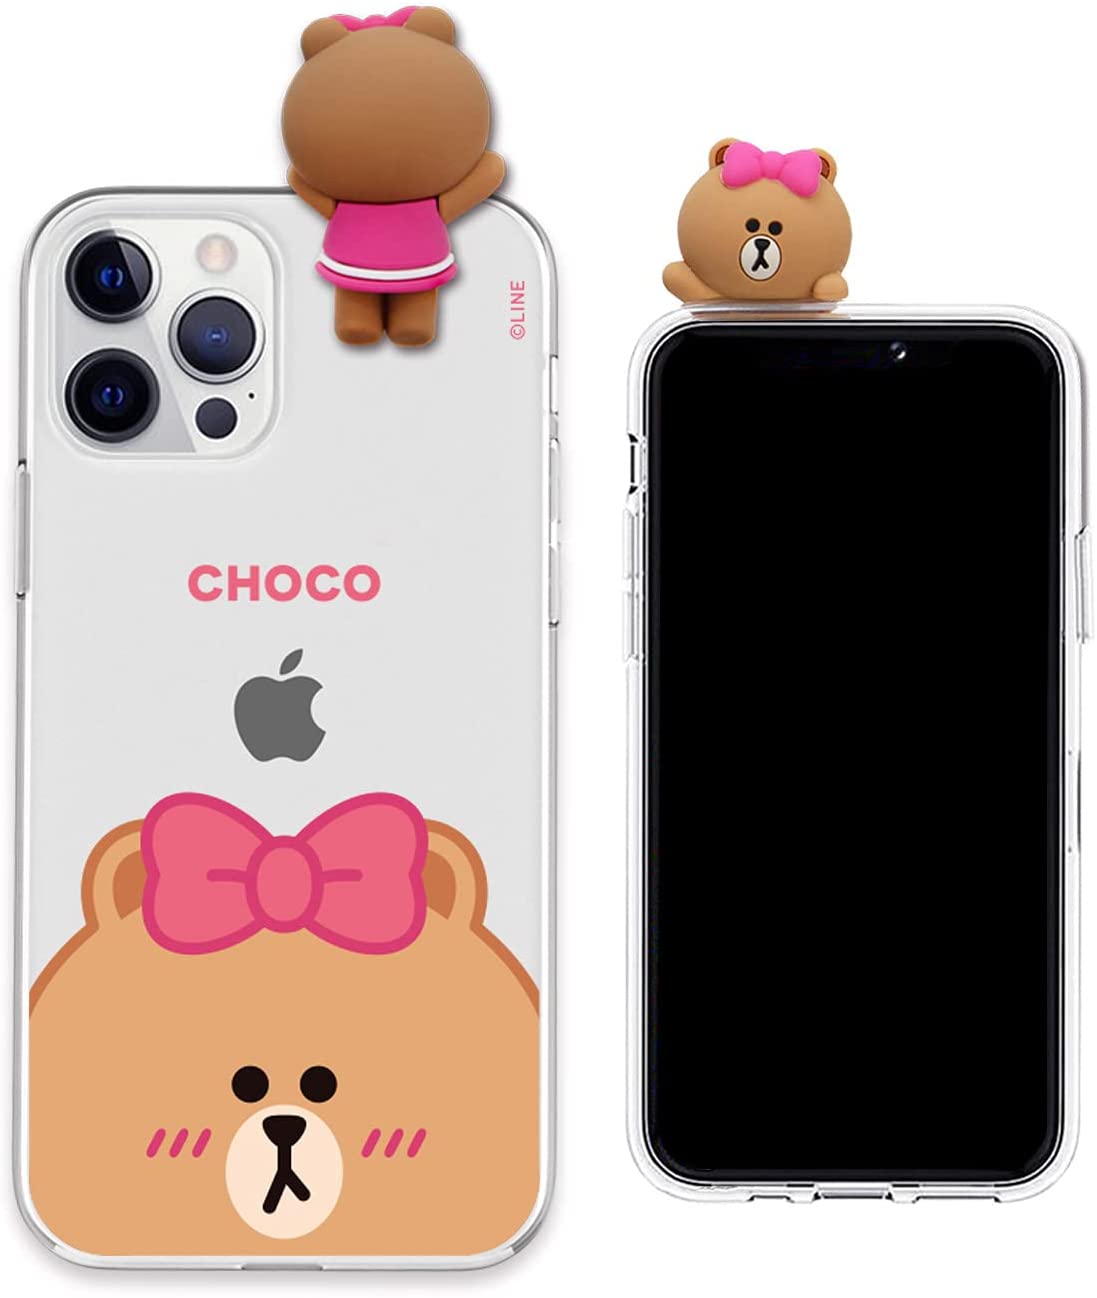 LINE FRIENDS iPhone 12 P[X iPhone 12 Pro P[X [ CZXi CtY `R NA tBMAt ] FACE CHOCO KCE-CSG368yKi/(LN^[ObY)